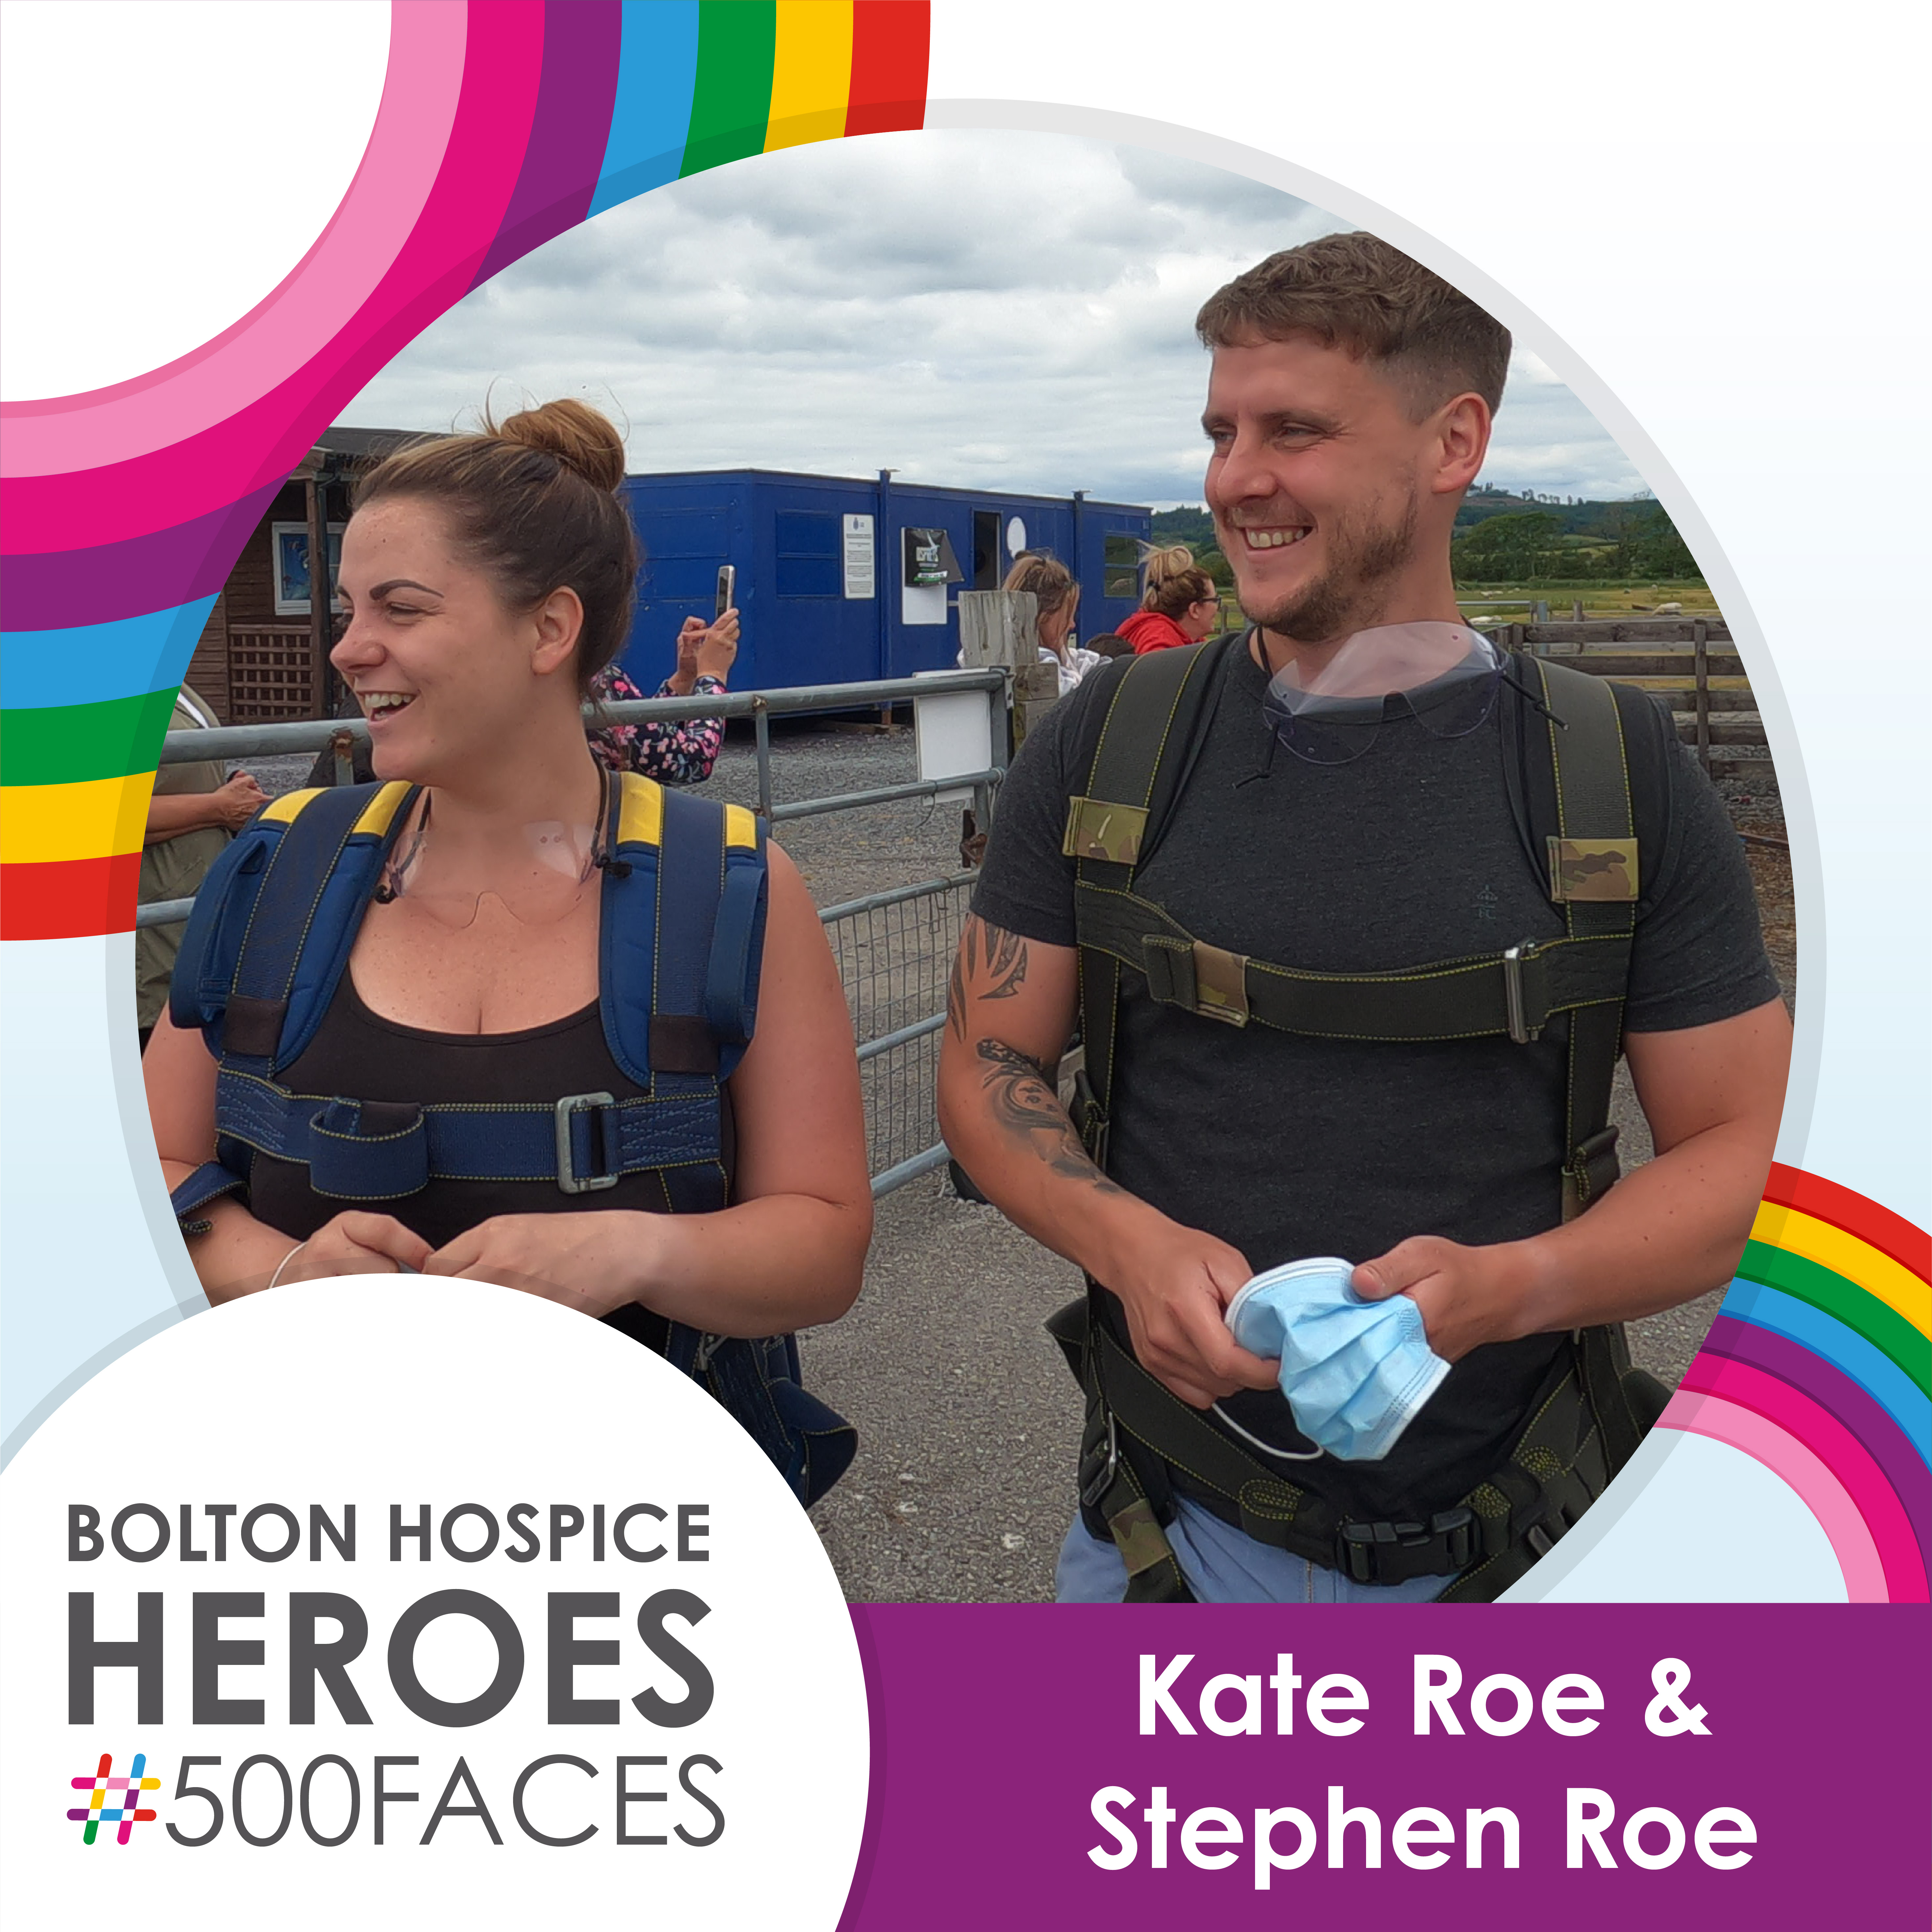 Kate Roe and Stephen Roe